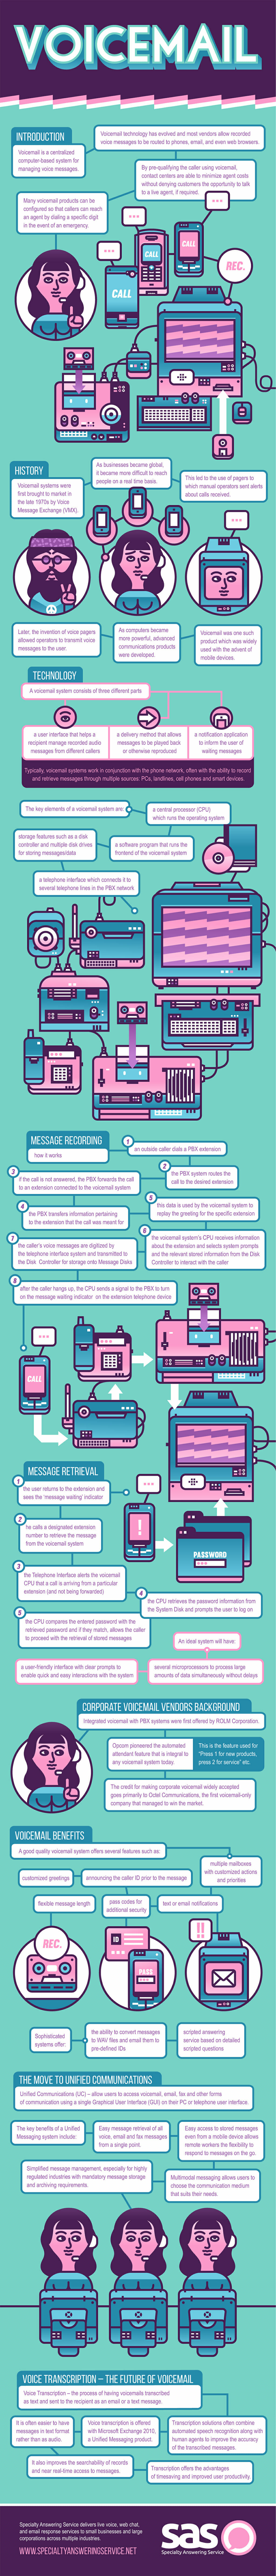 Learn All About Voicemail Infographic